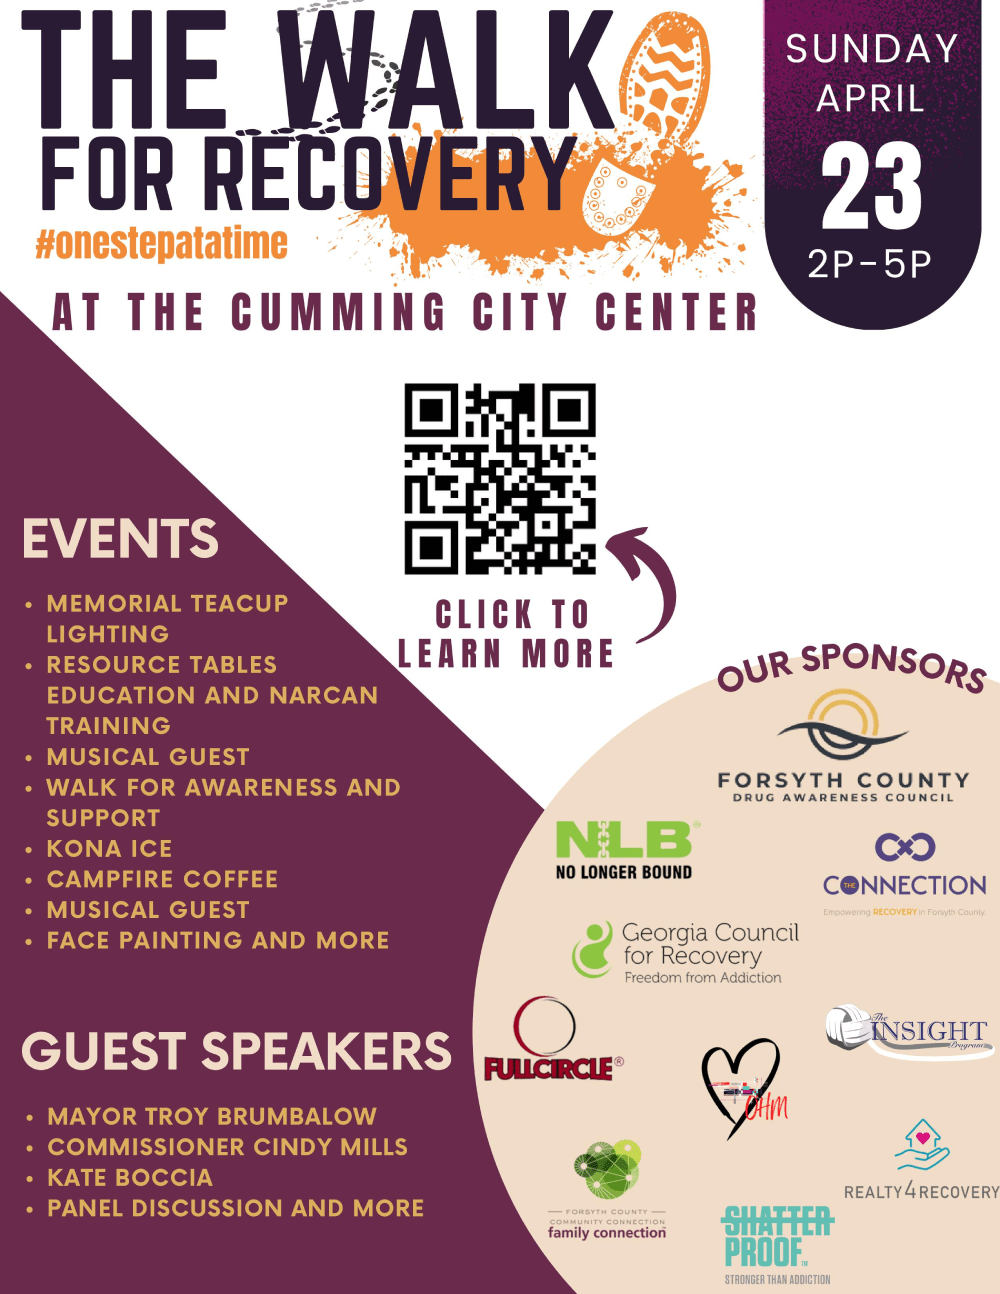 The Walk for Recovery